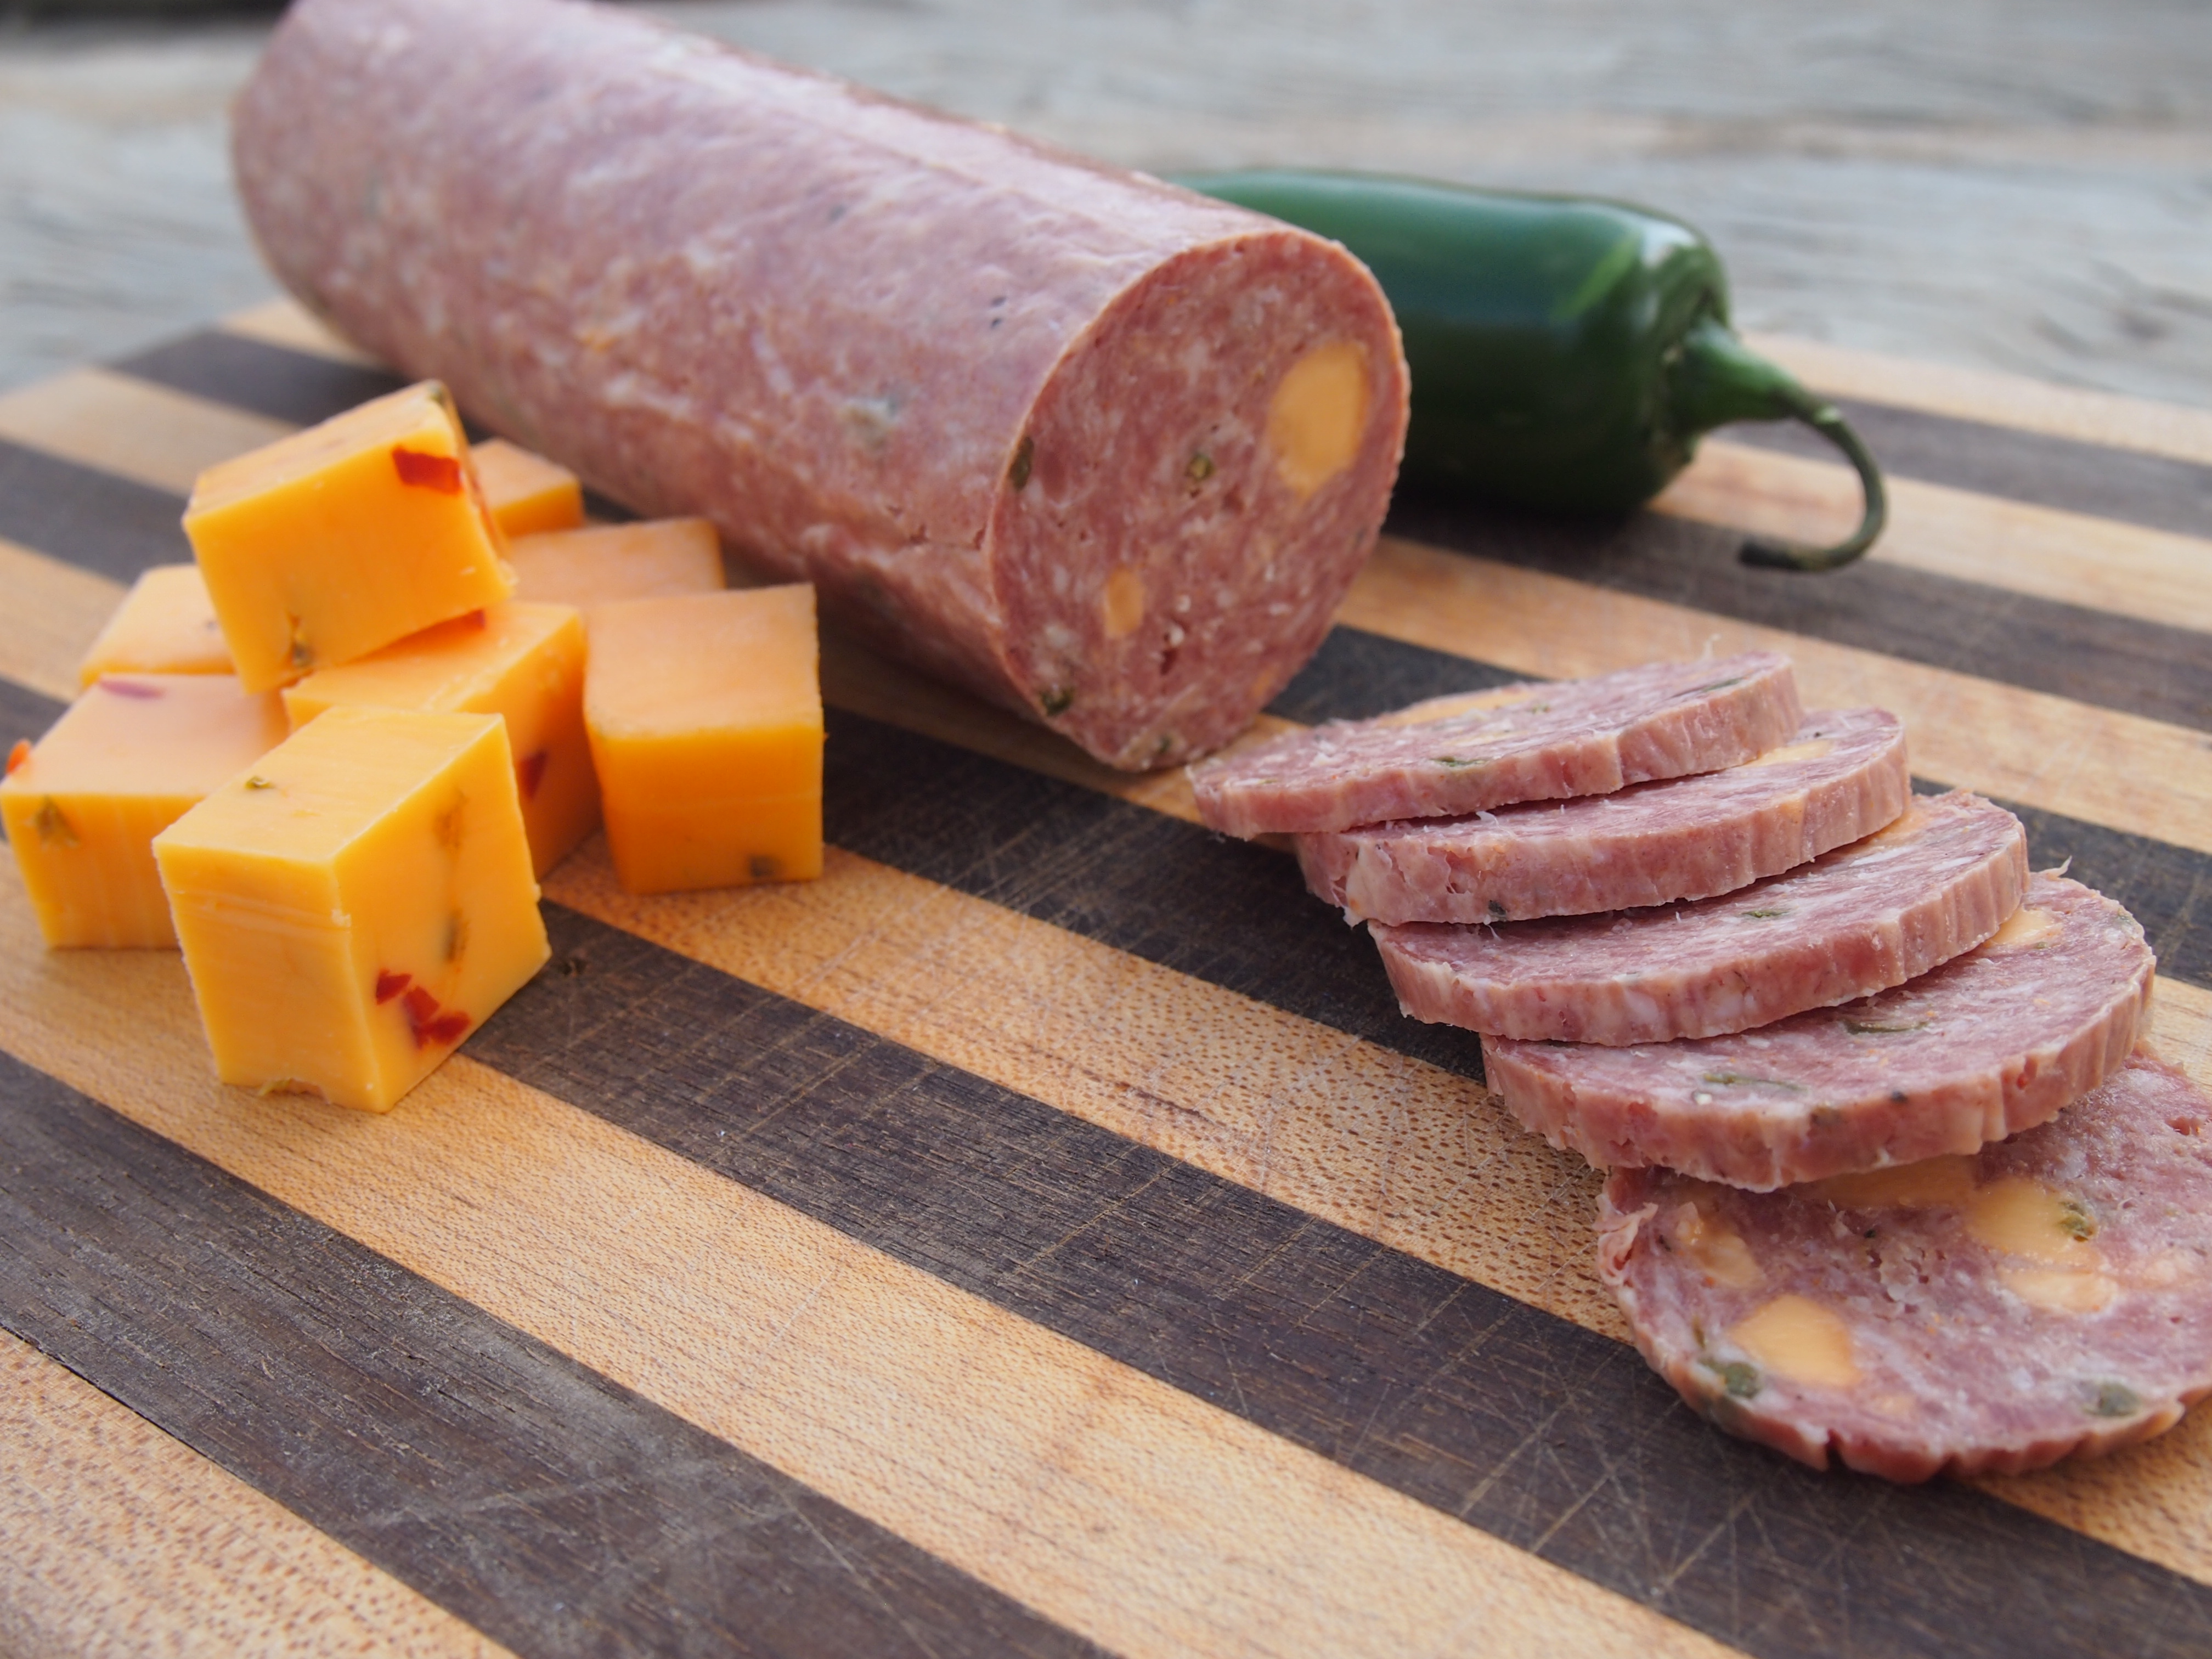 Summer Sausage With Jalapeno and Cheddar